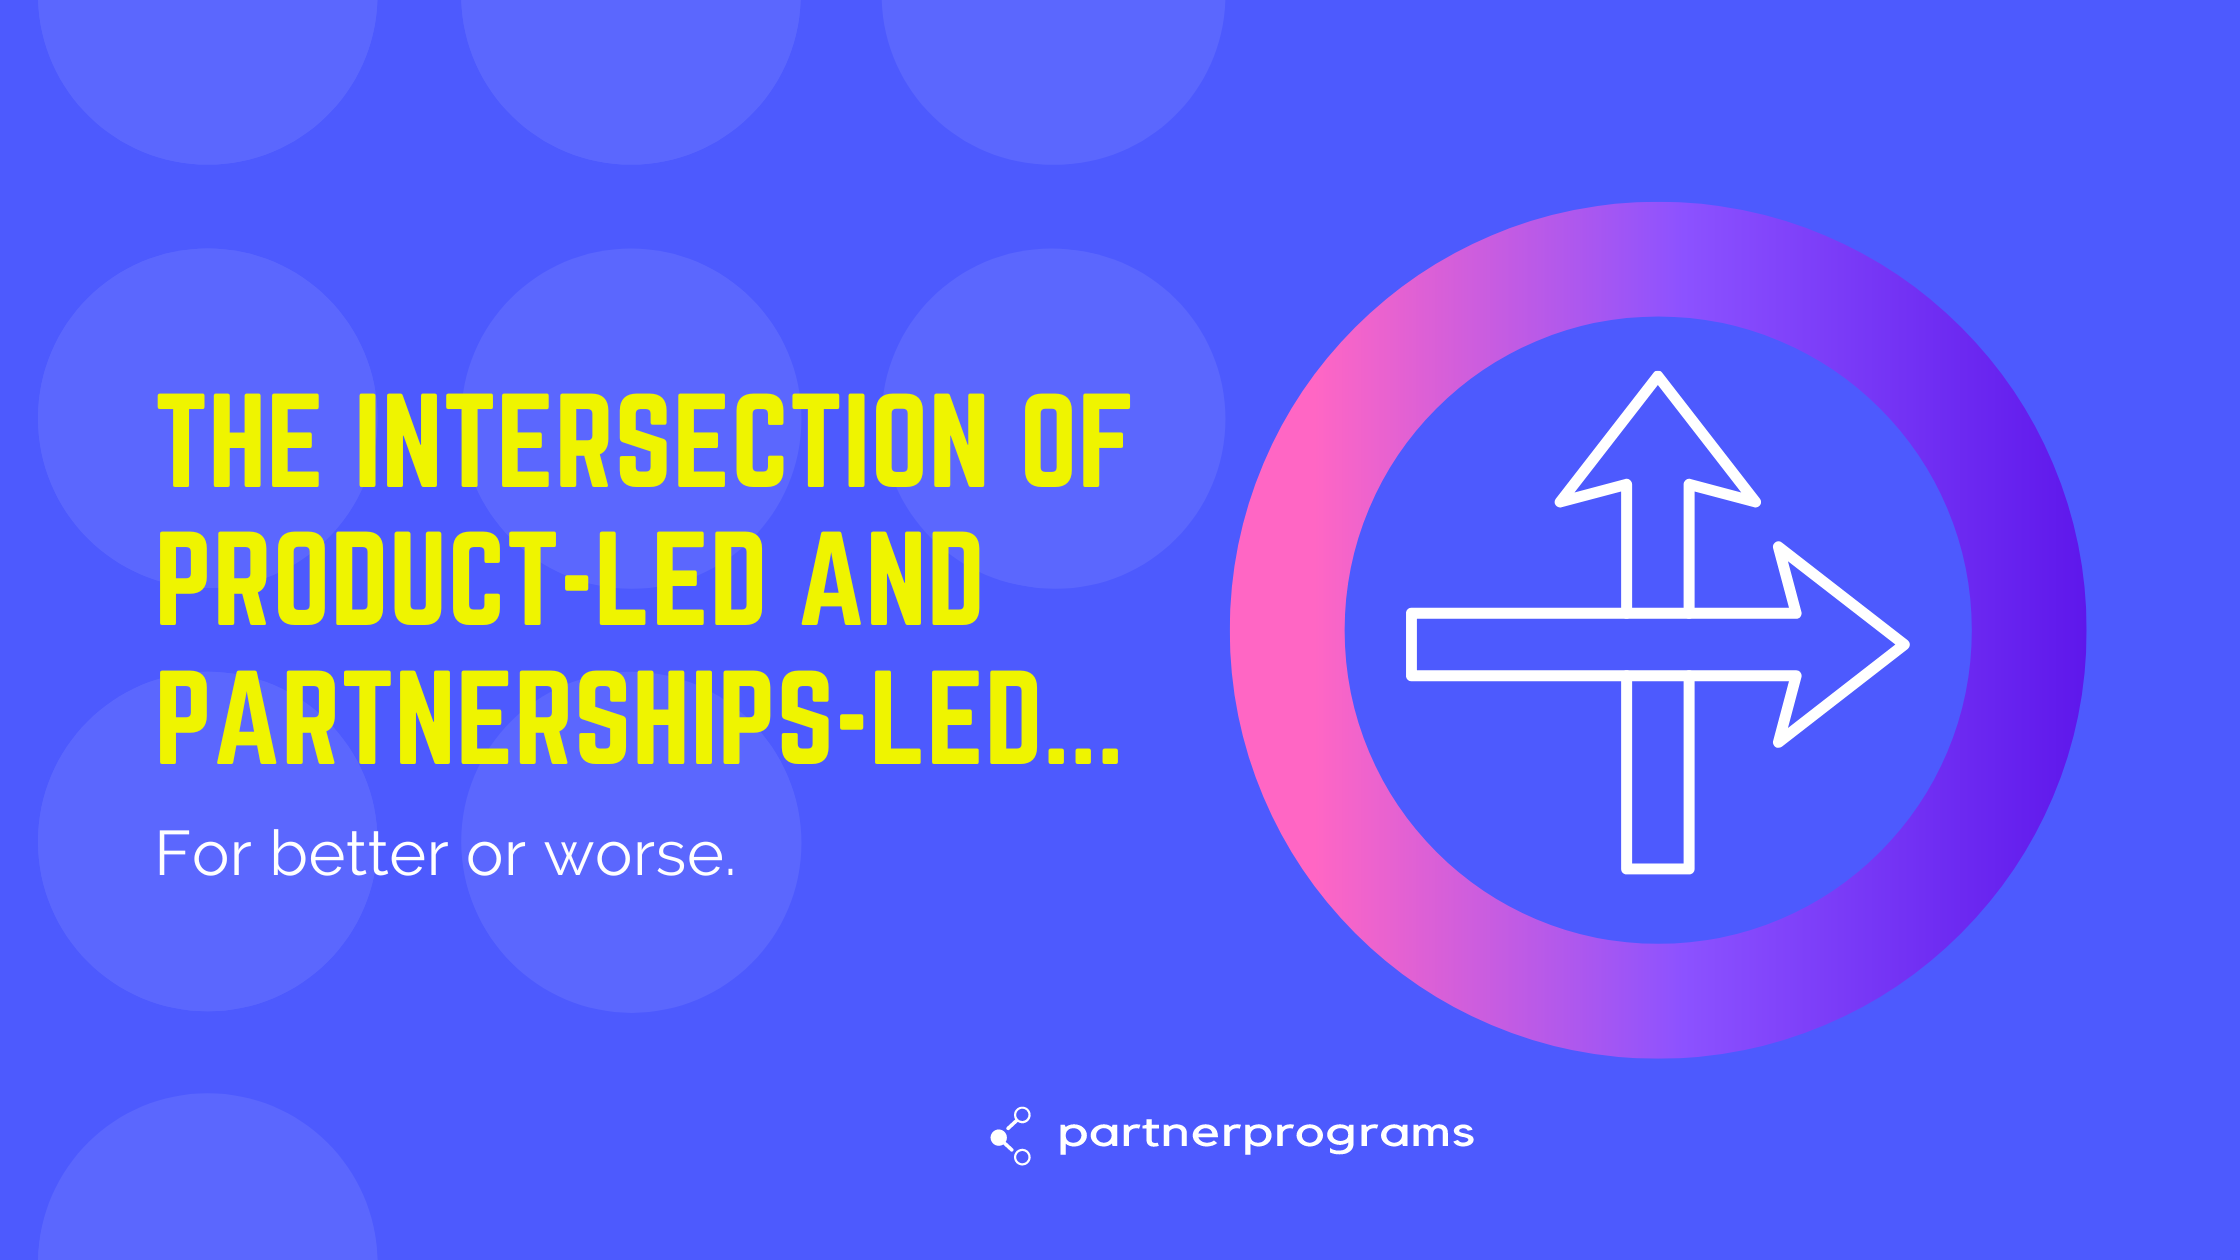 The intersection of product-led and partnerships-led